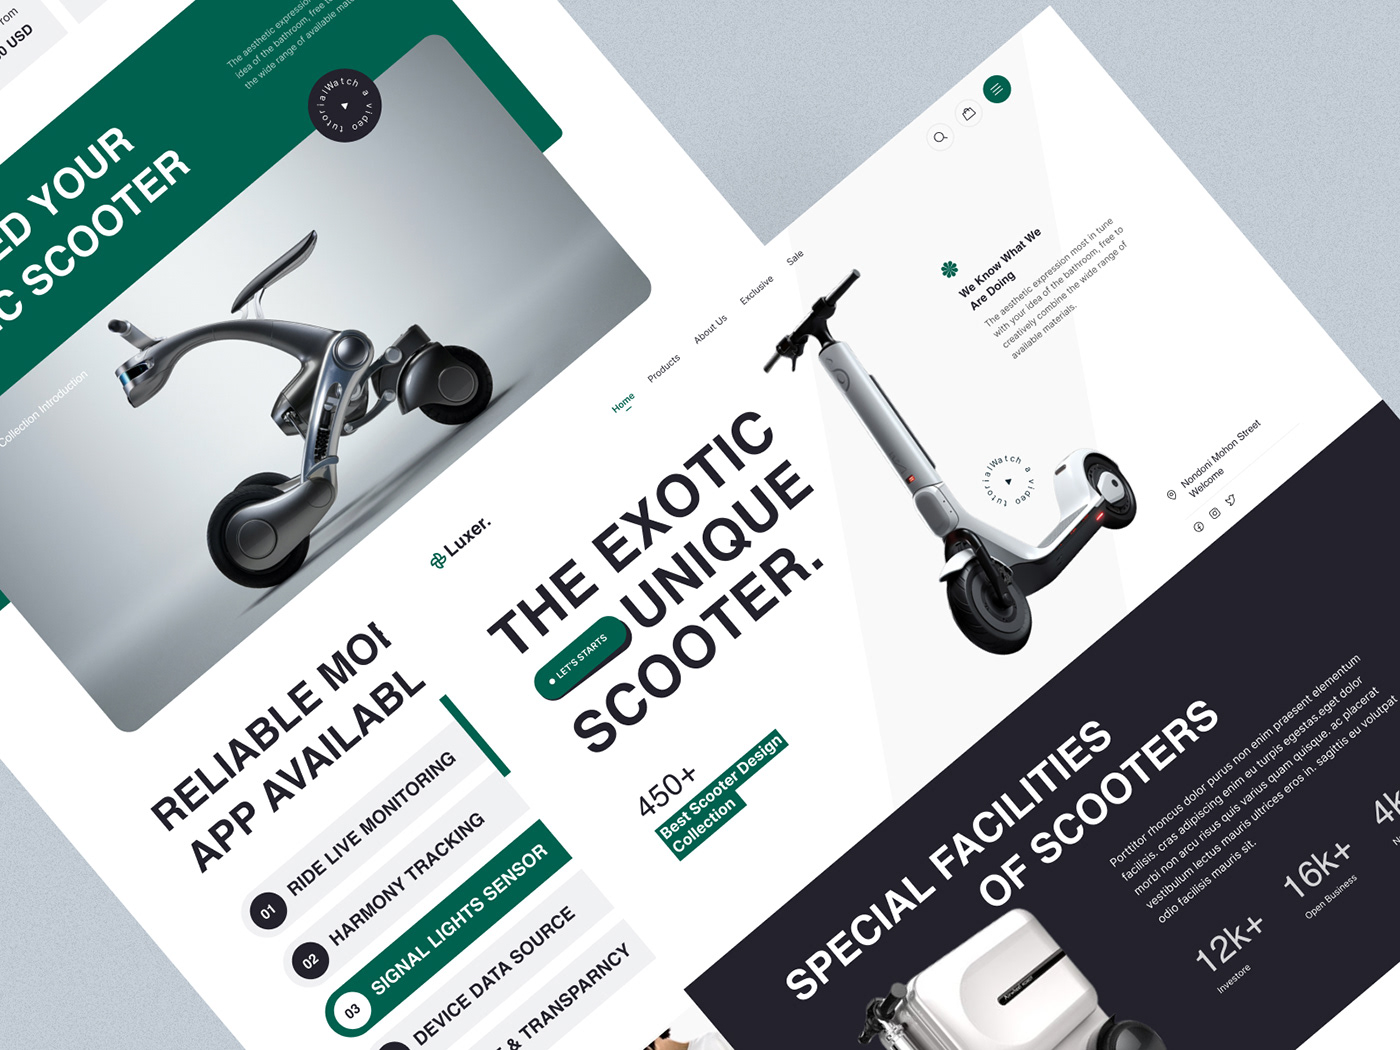 Scooter Bike Bicycle motorbike motorcycle Clean Design minimalist wix scooter app scooter landing page